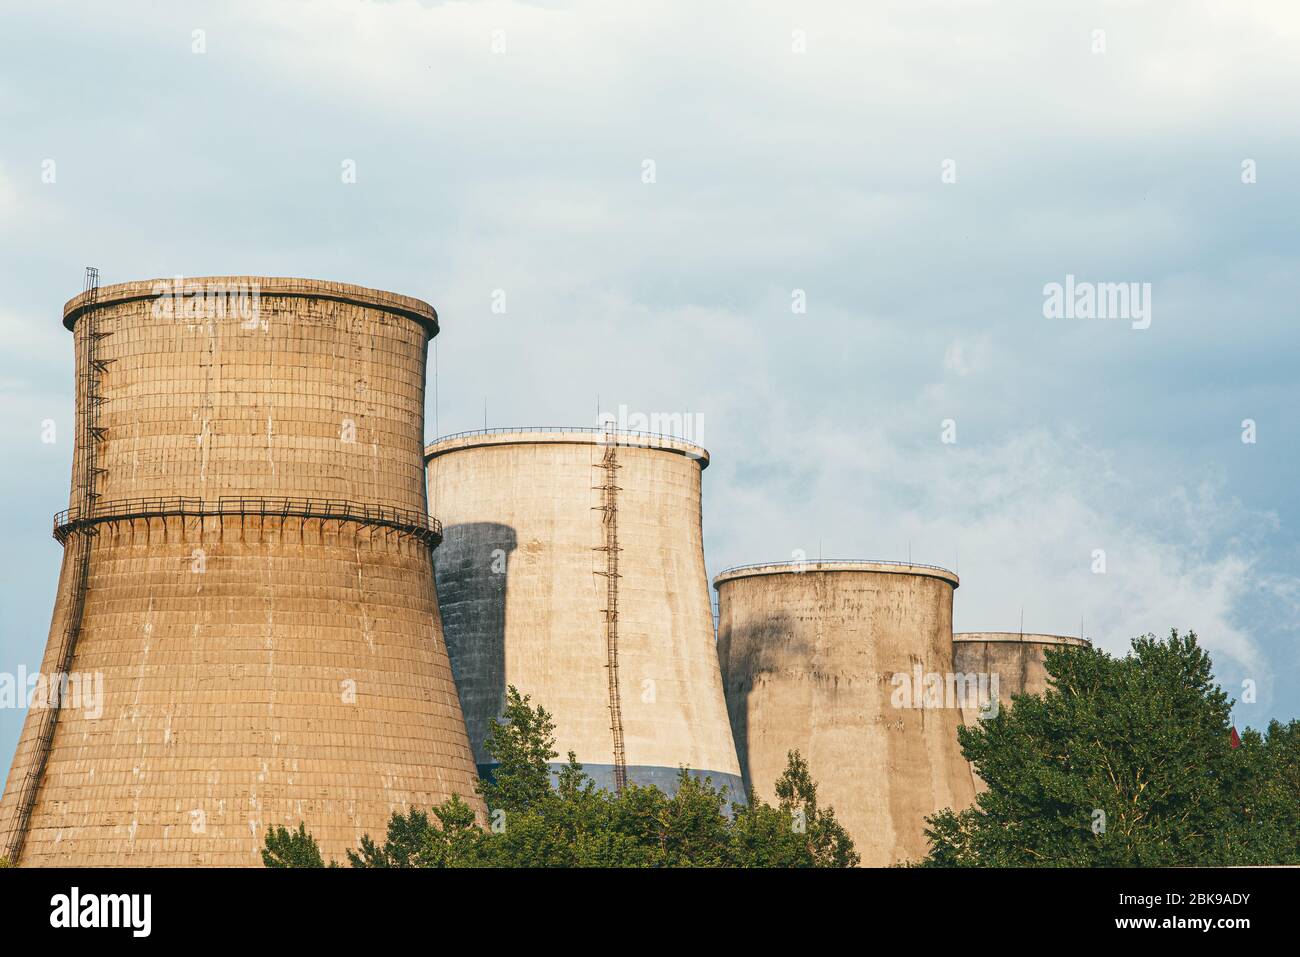 The factory releases smoke into the sky from pipes polluting the atmosphere Stock Photo